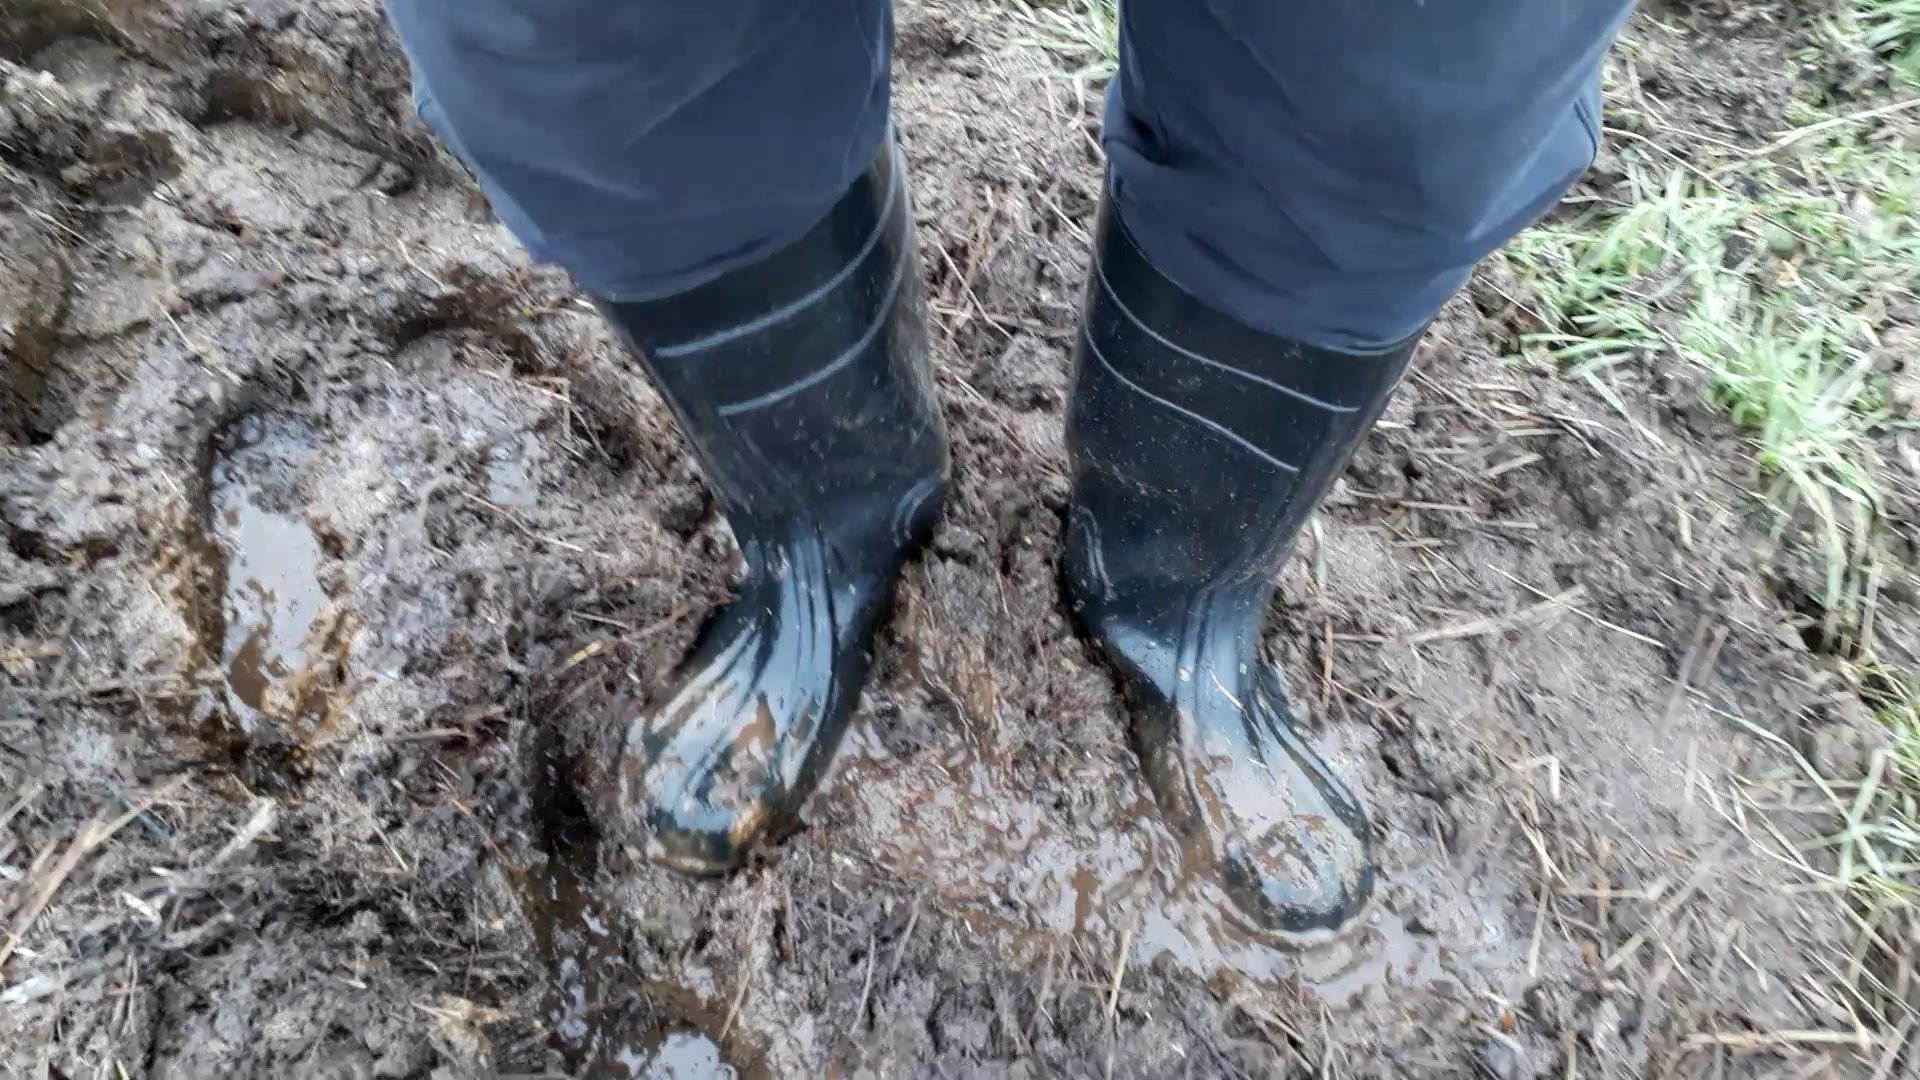 Rubber boots vs manure - video 3